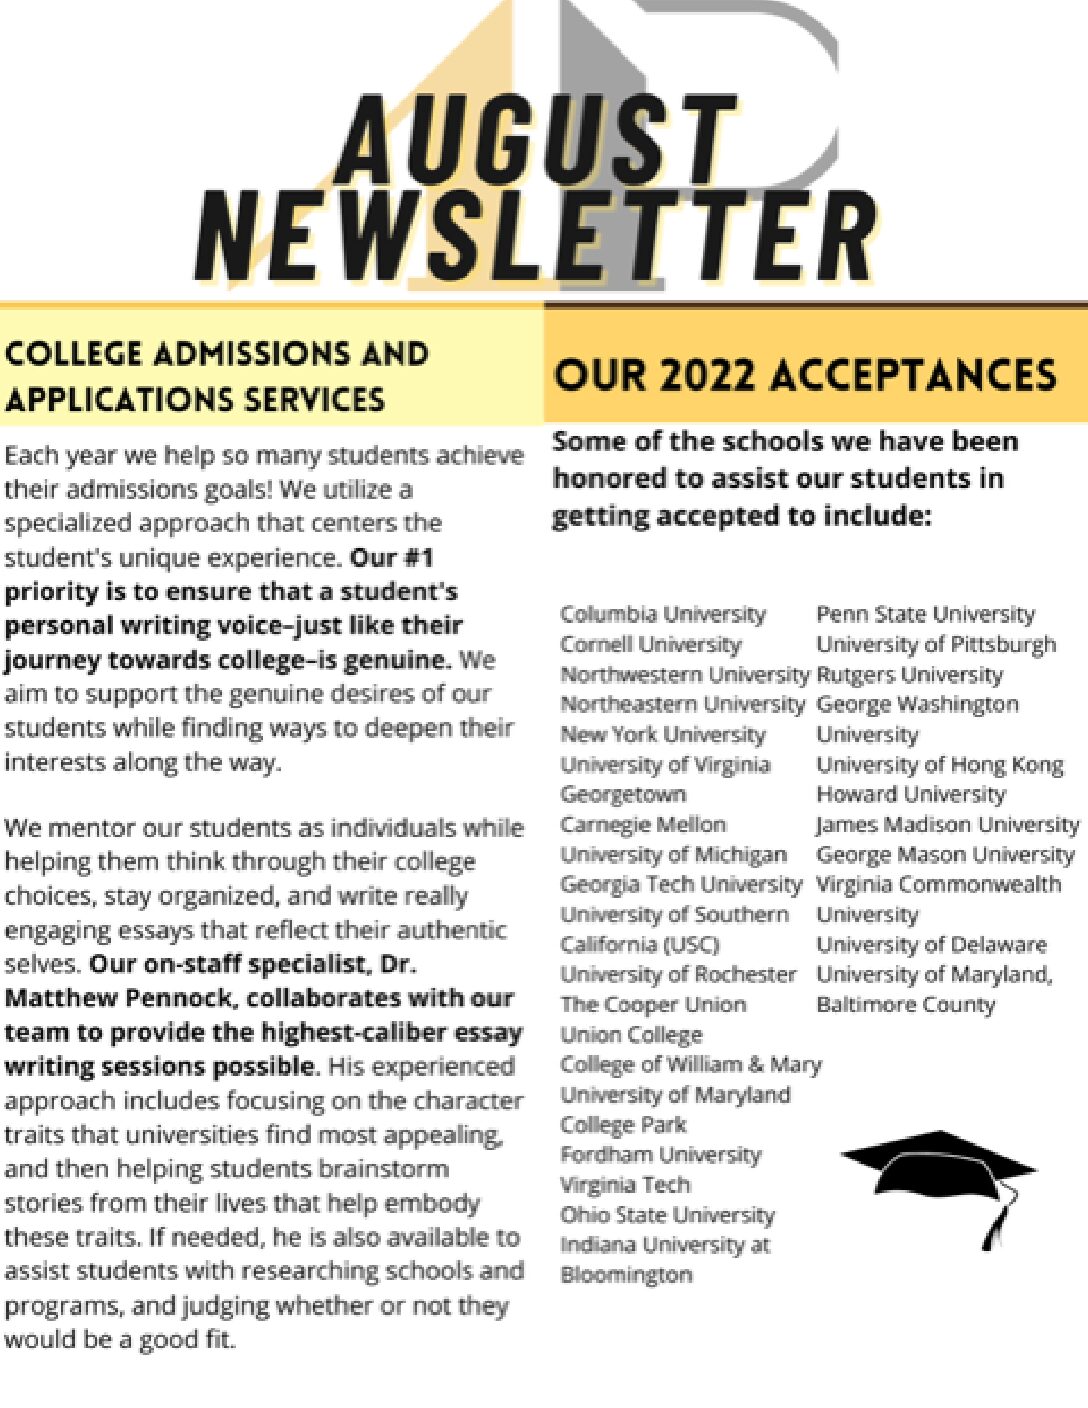 August newsletter focused on college admissions and acceptances of our scholars